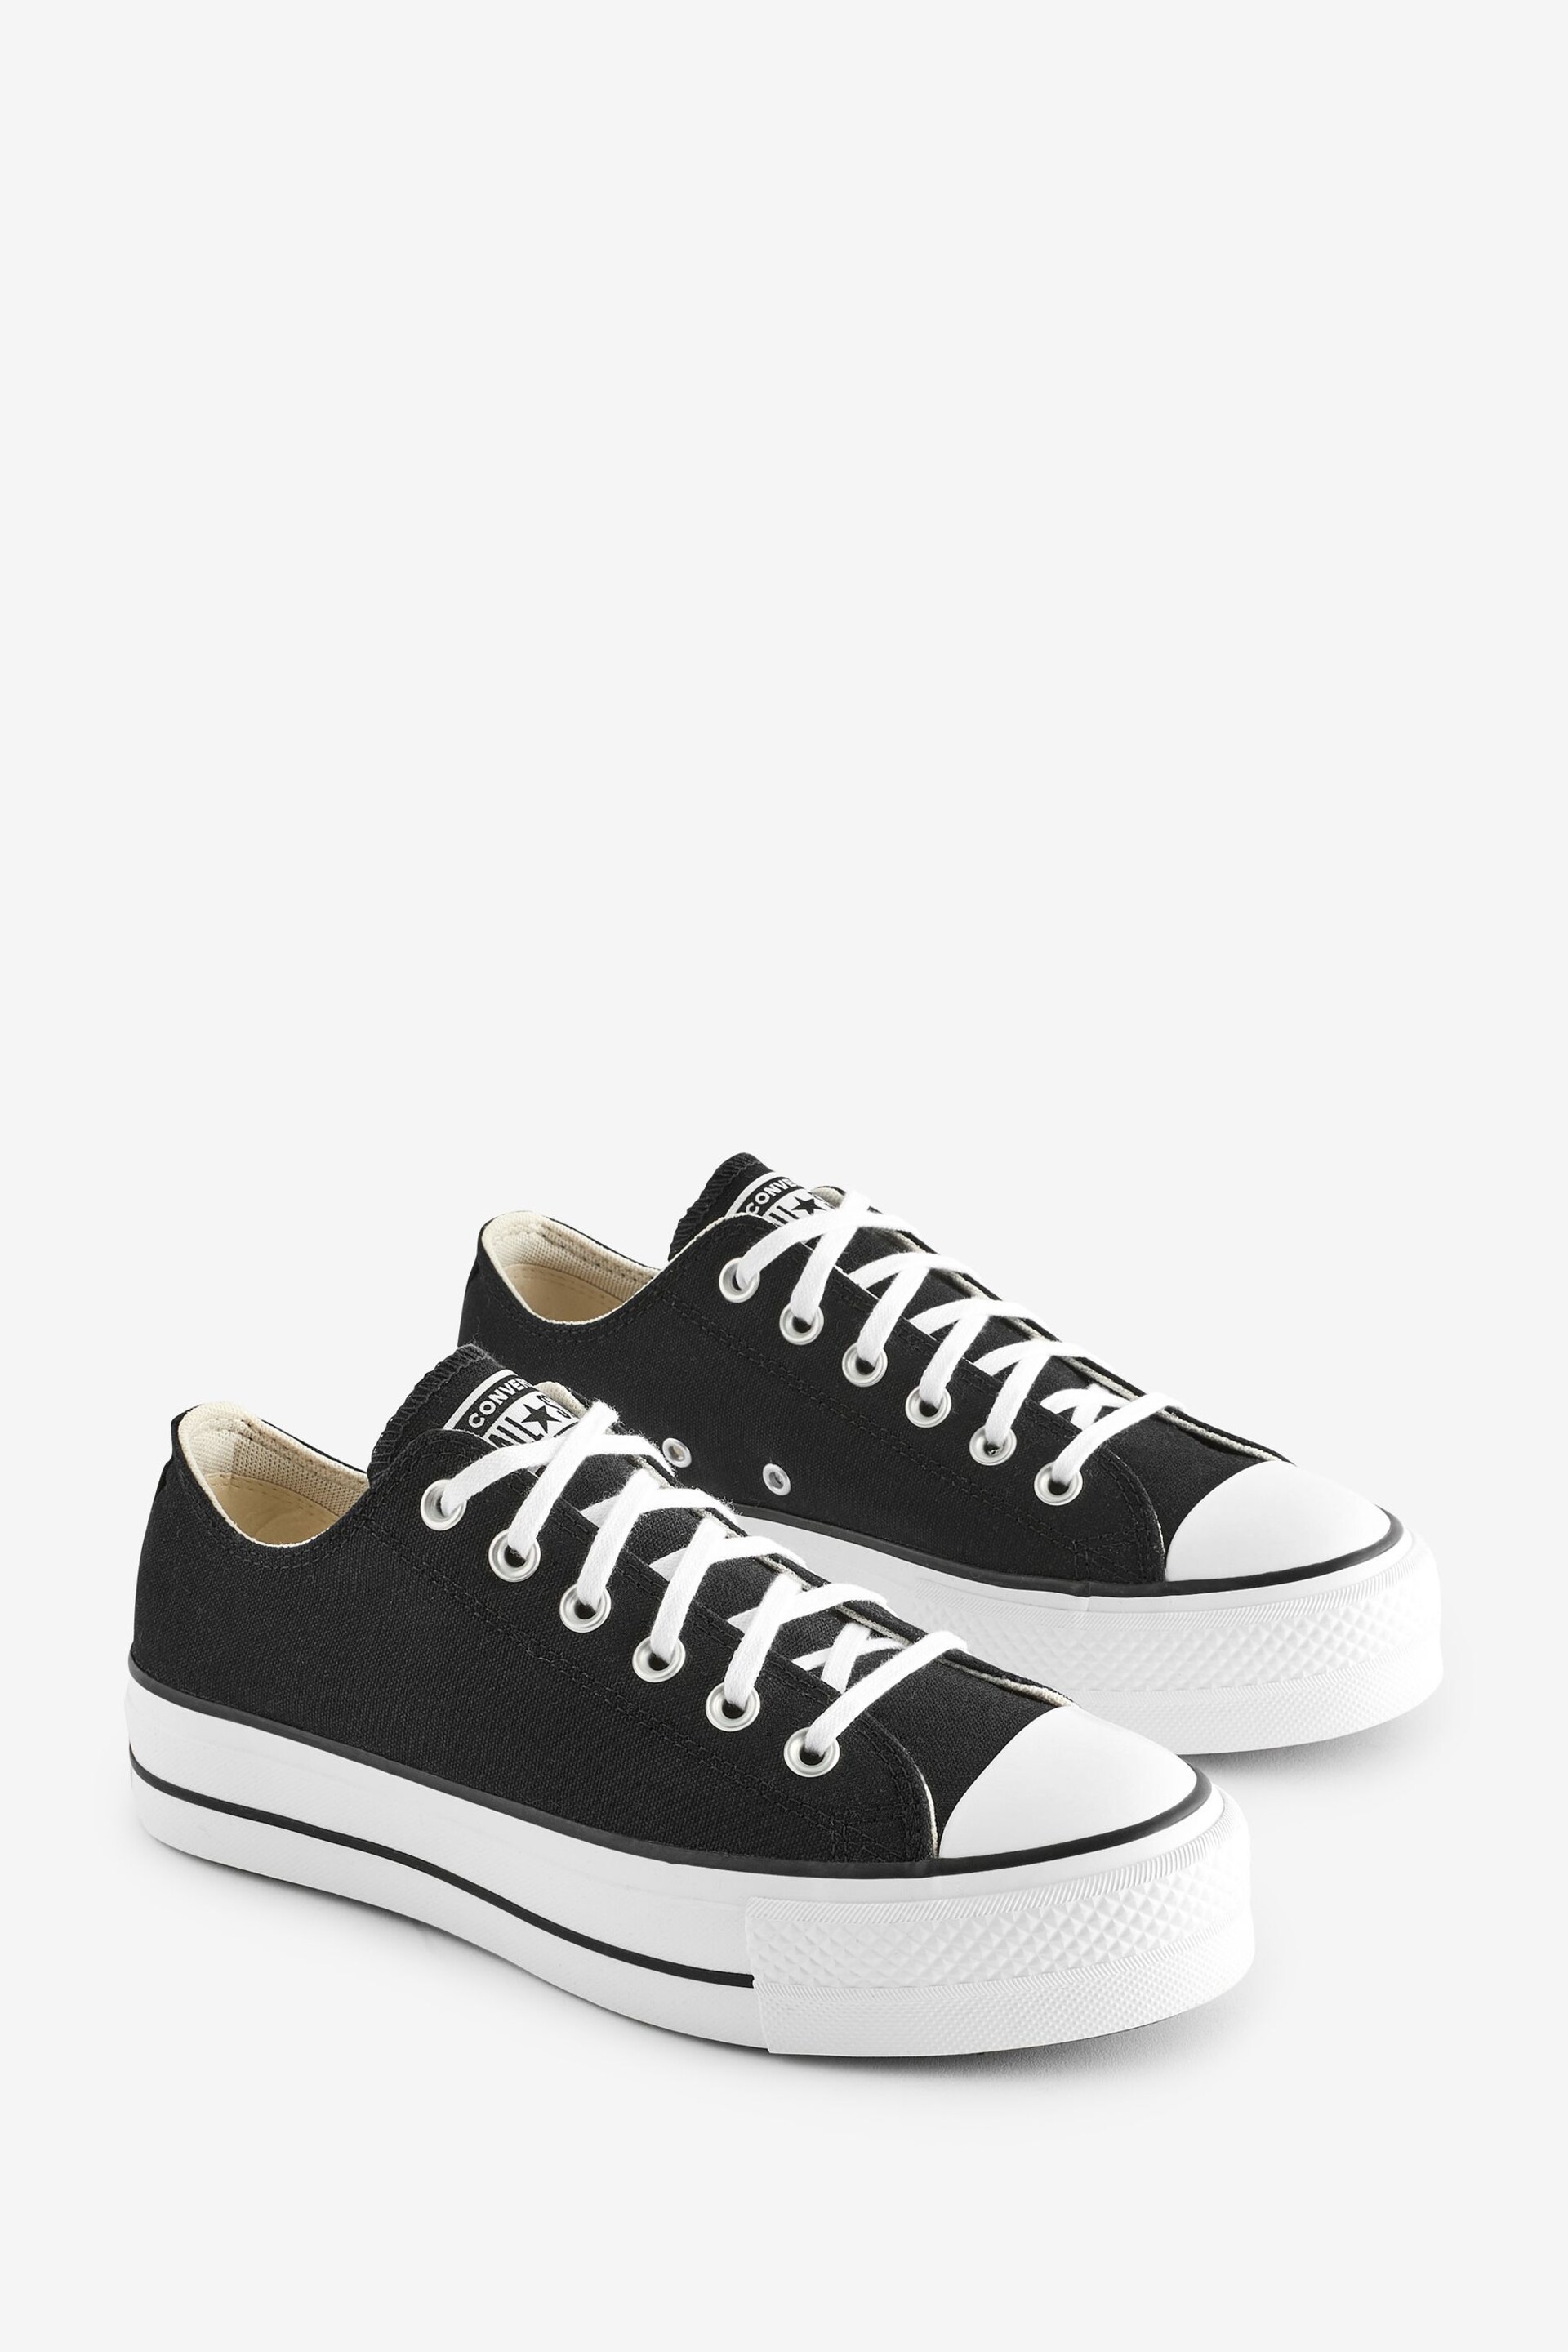 Converse Black Chuck Taylor All Star Lift Ox Trainers - Image 6 of 9